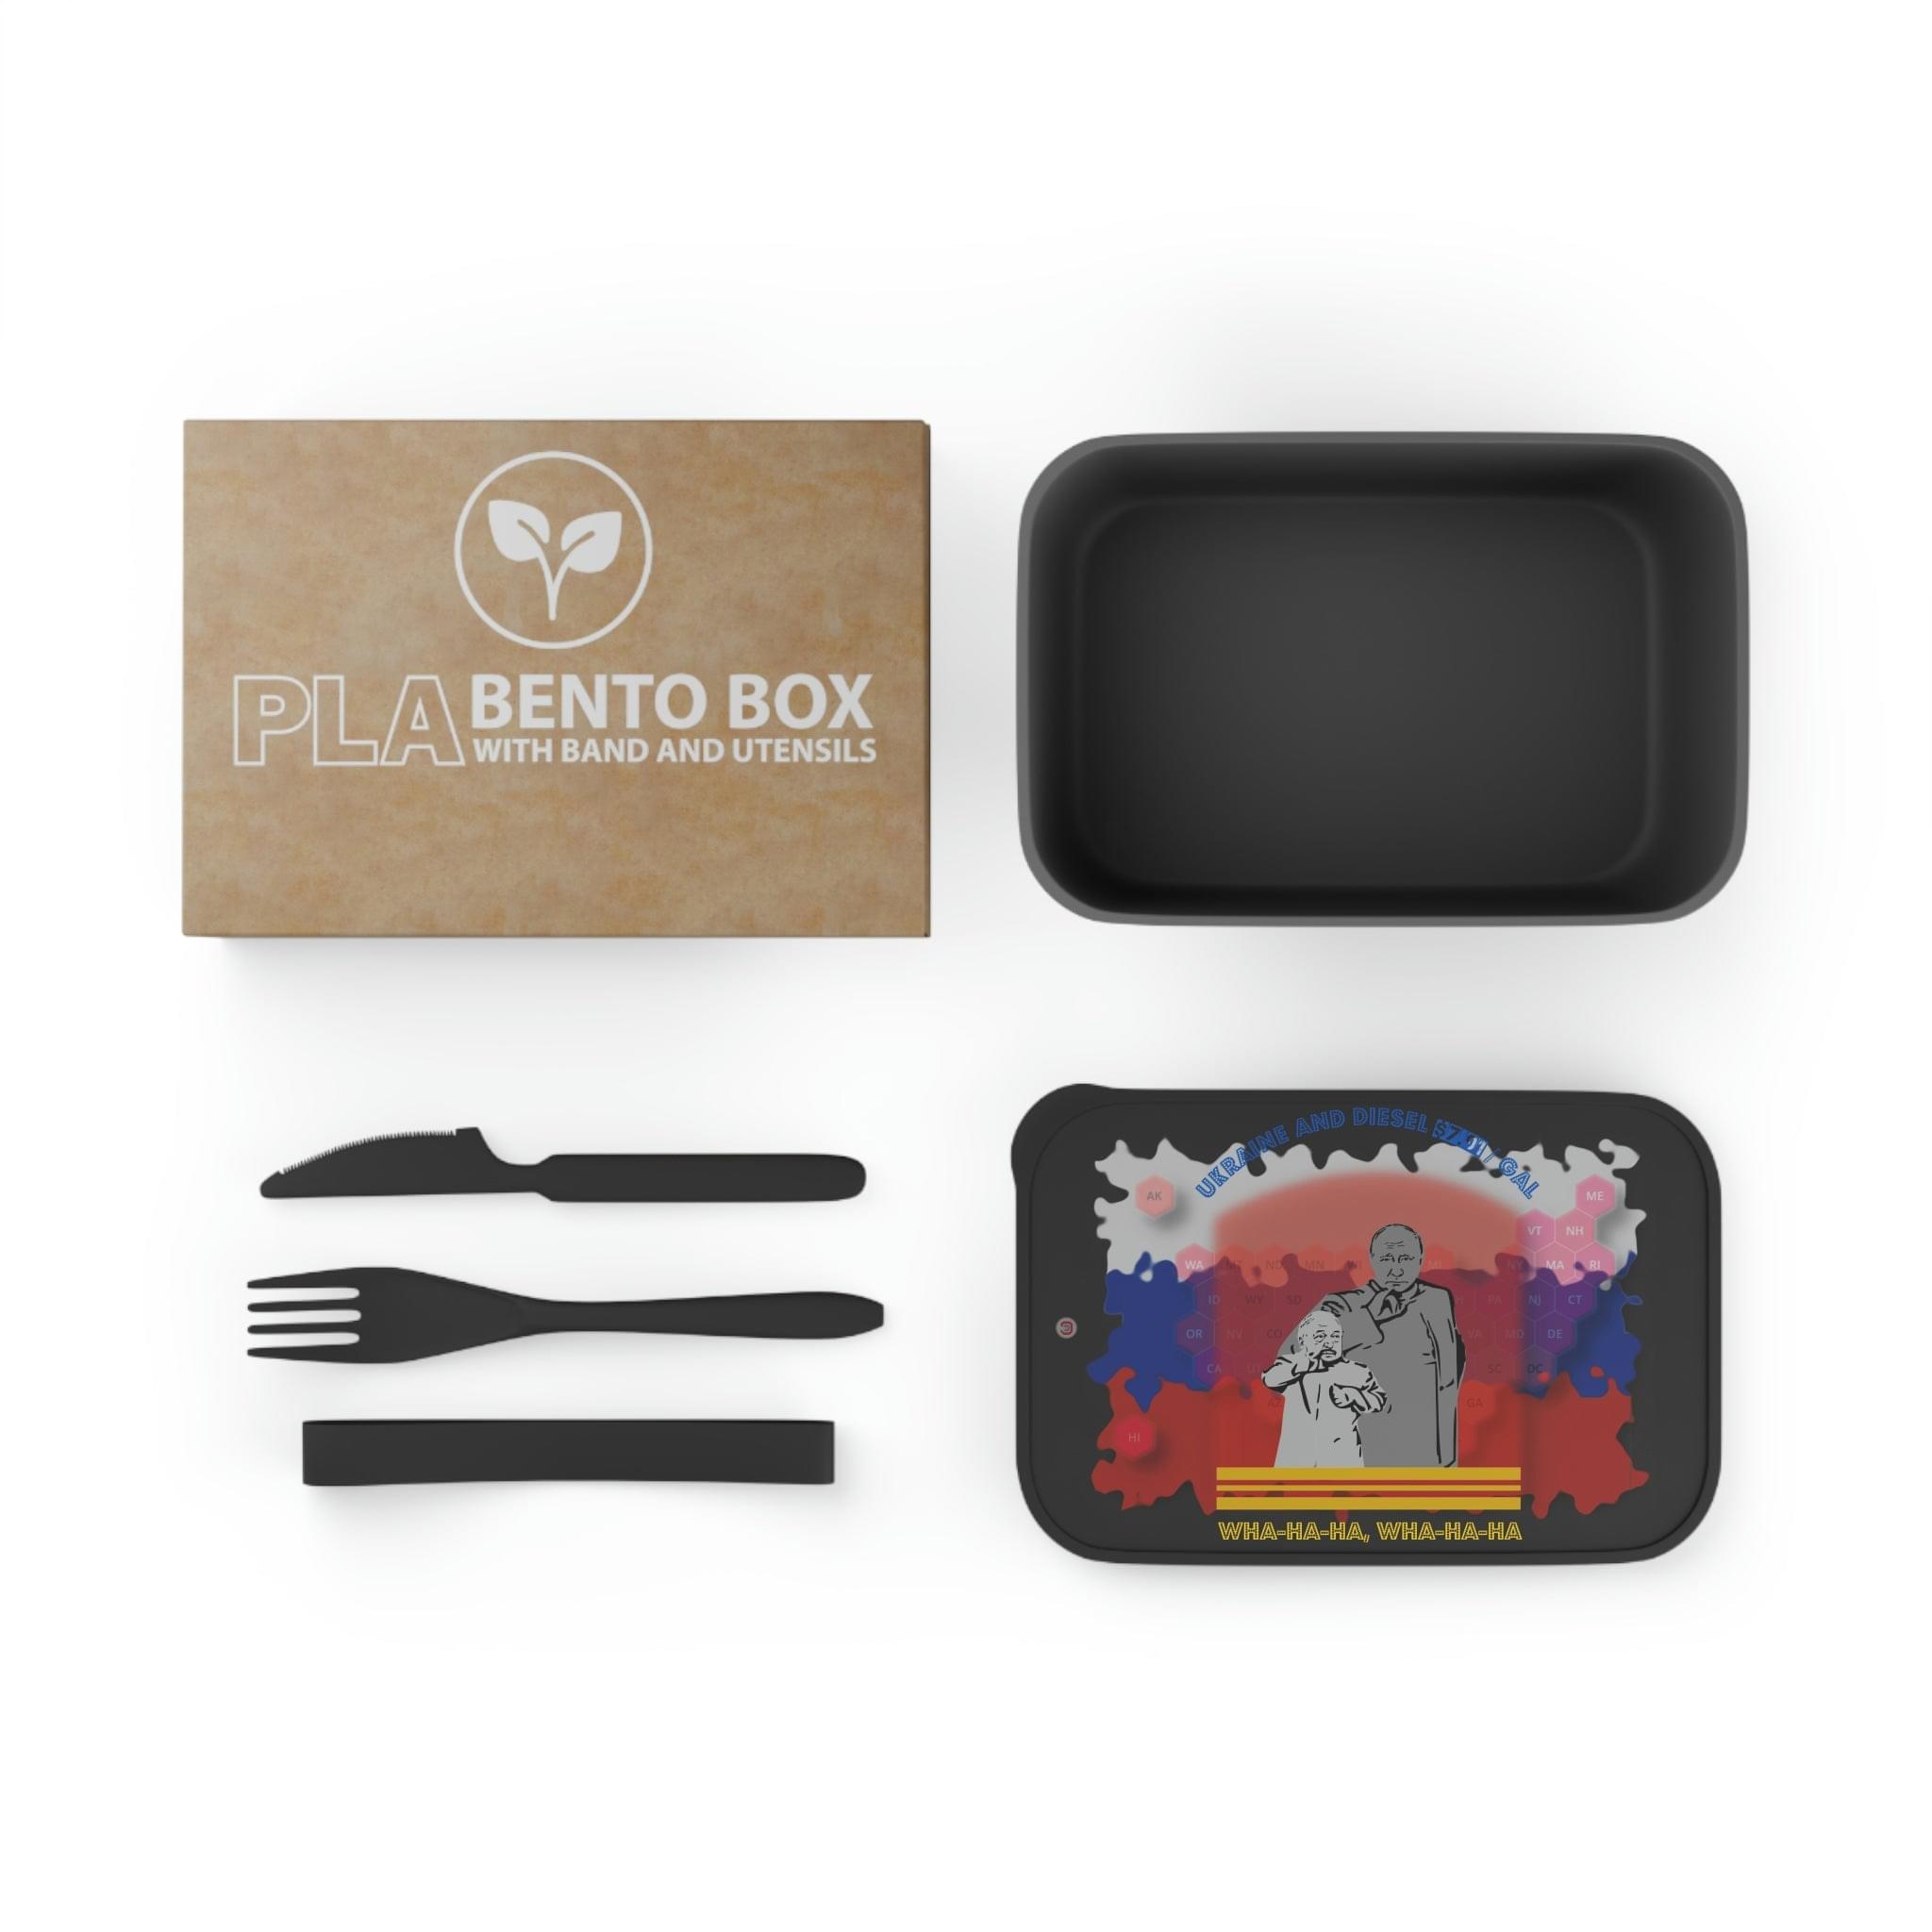 Lunch box with utensils | Customizable eco-friendly way to enjoy your lunch in style